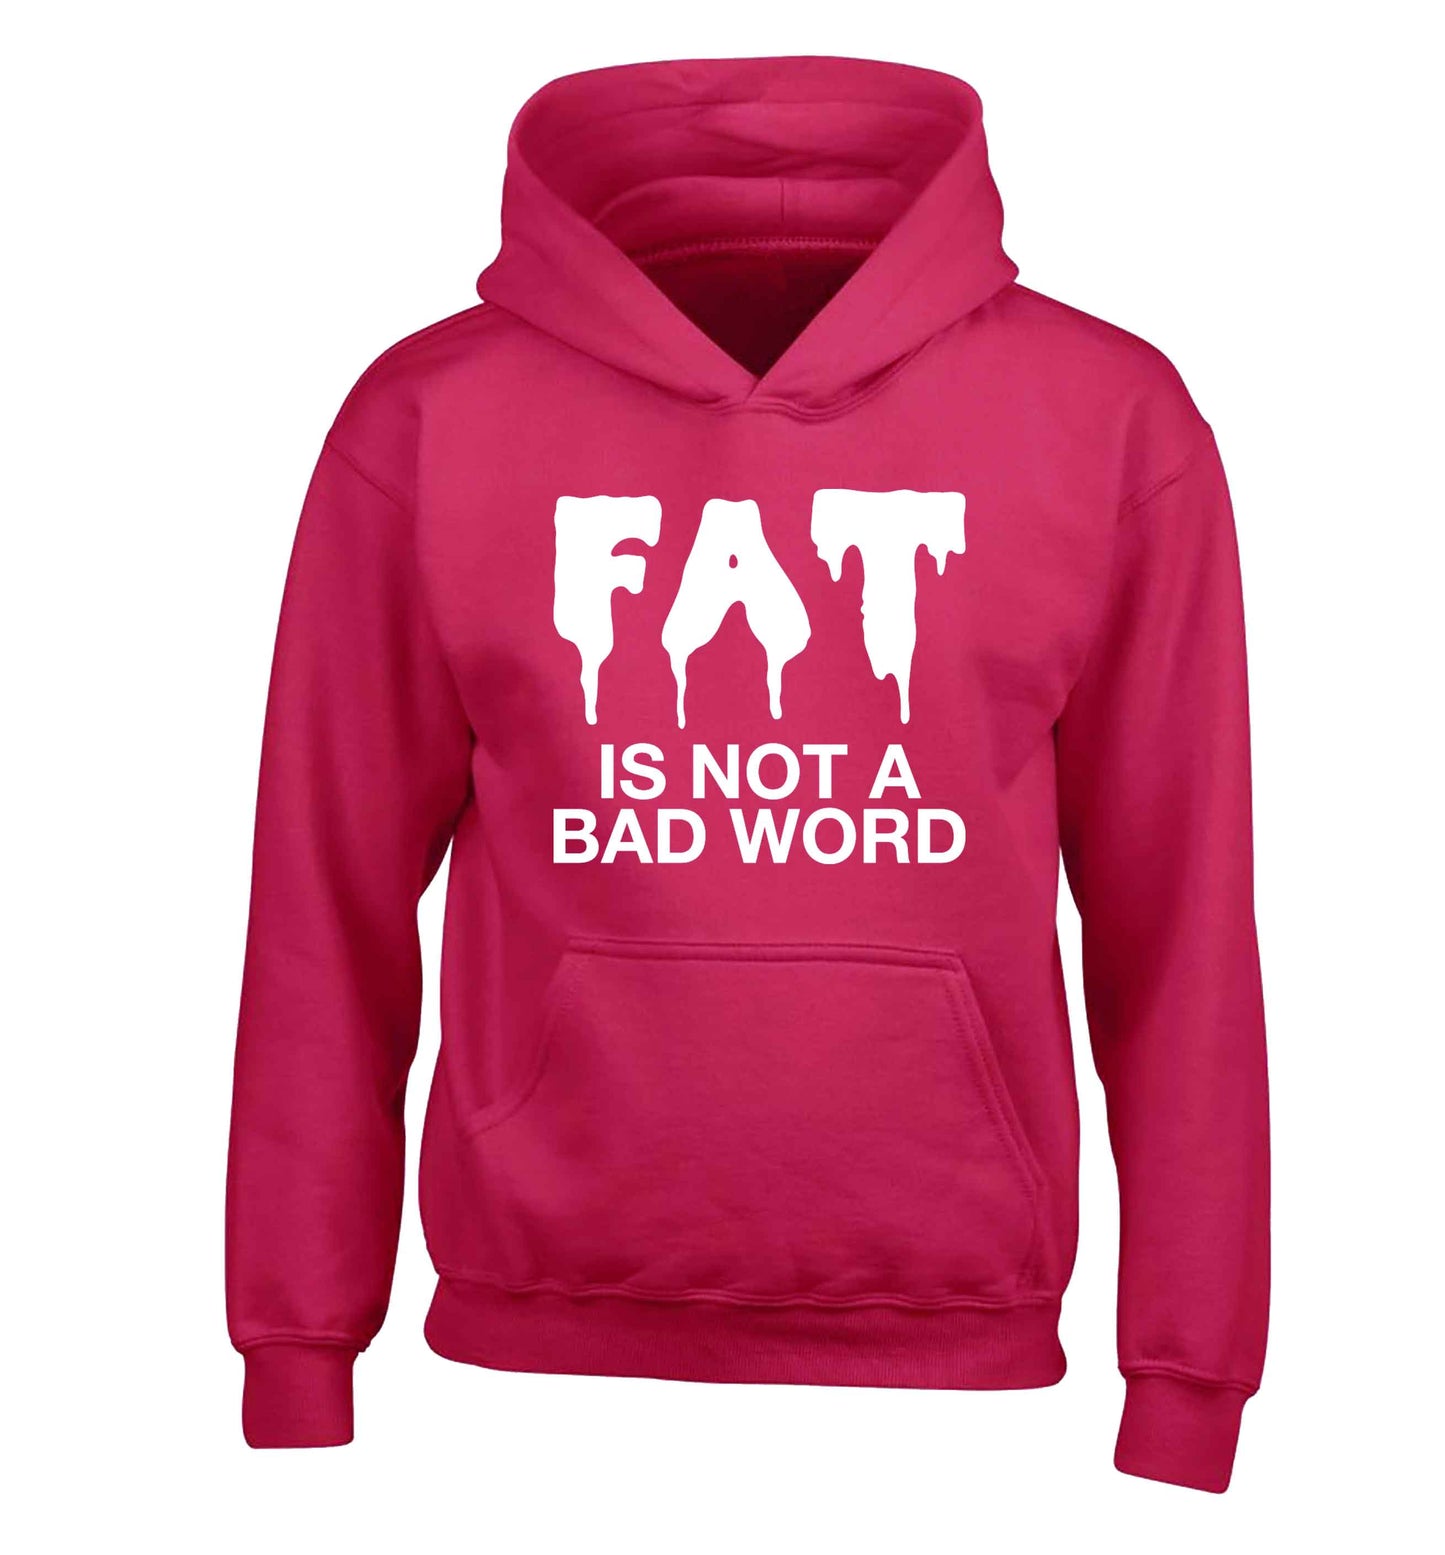 Fat is not a bad word children's pink hoodie 12-13 Years